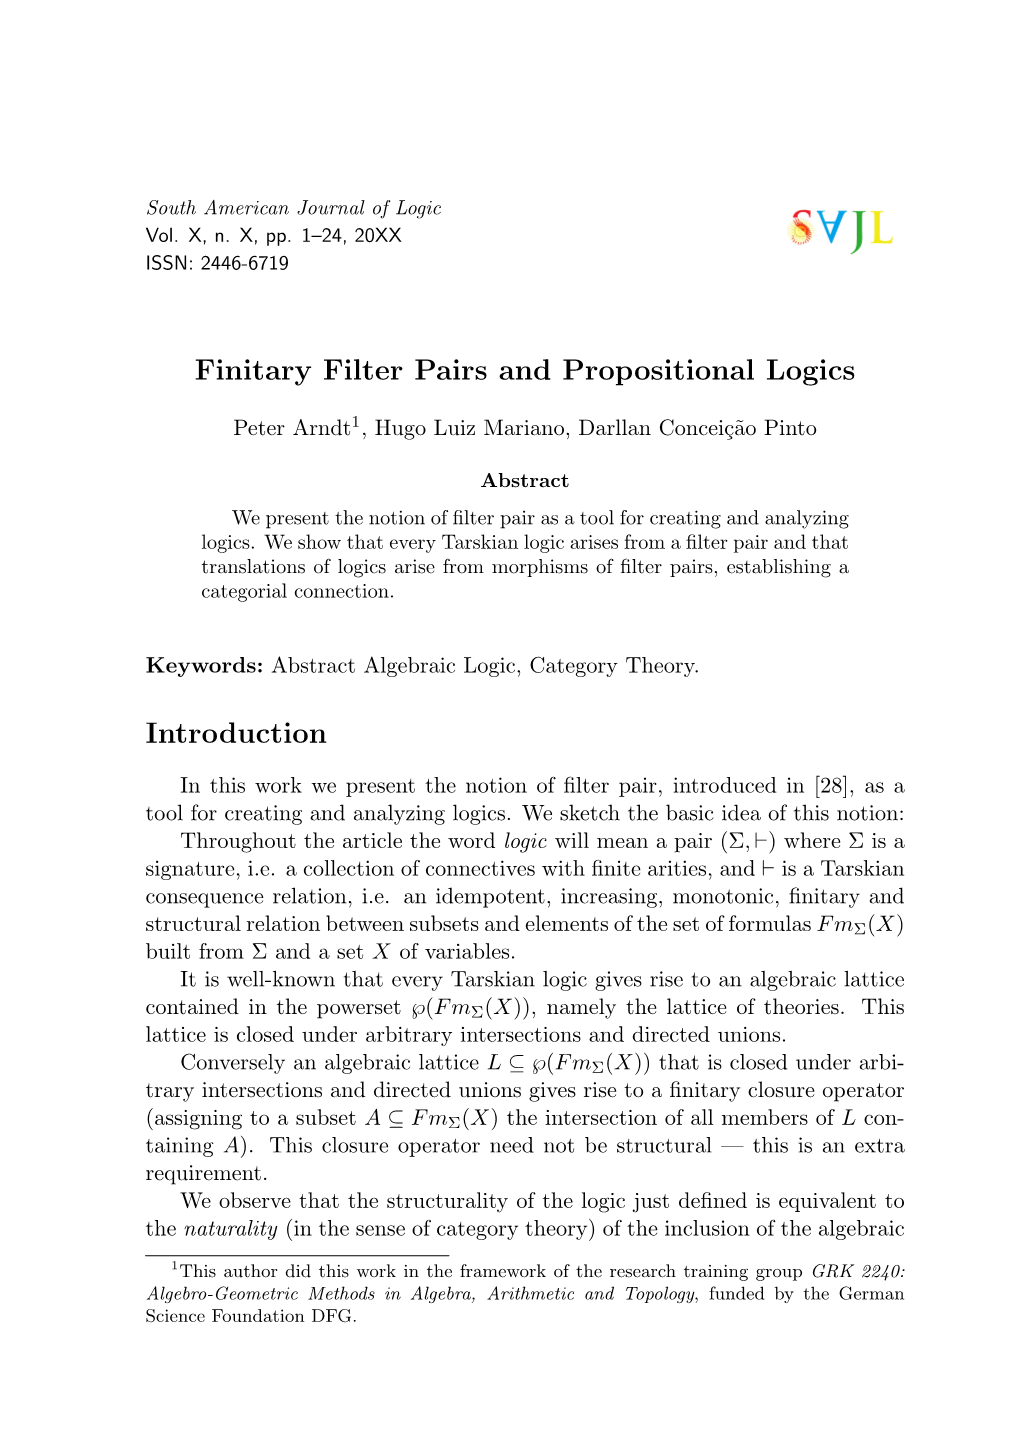 Finitary Filter Pairs and Propositional Logics Introduction